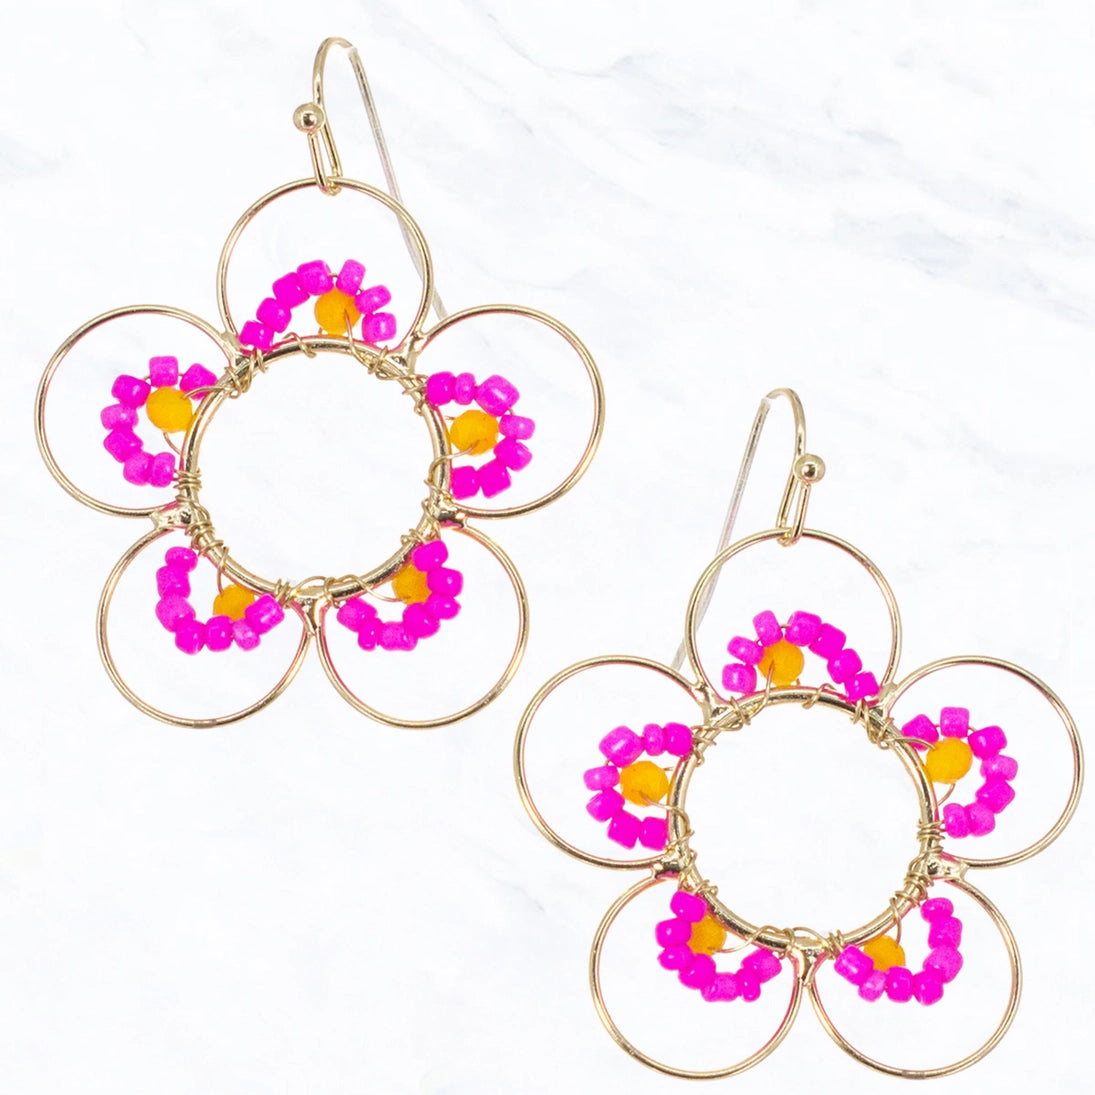 Metal Wire Flower Earrings with Seed Beads